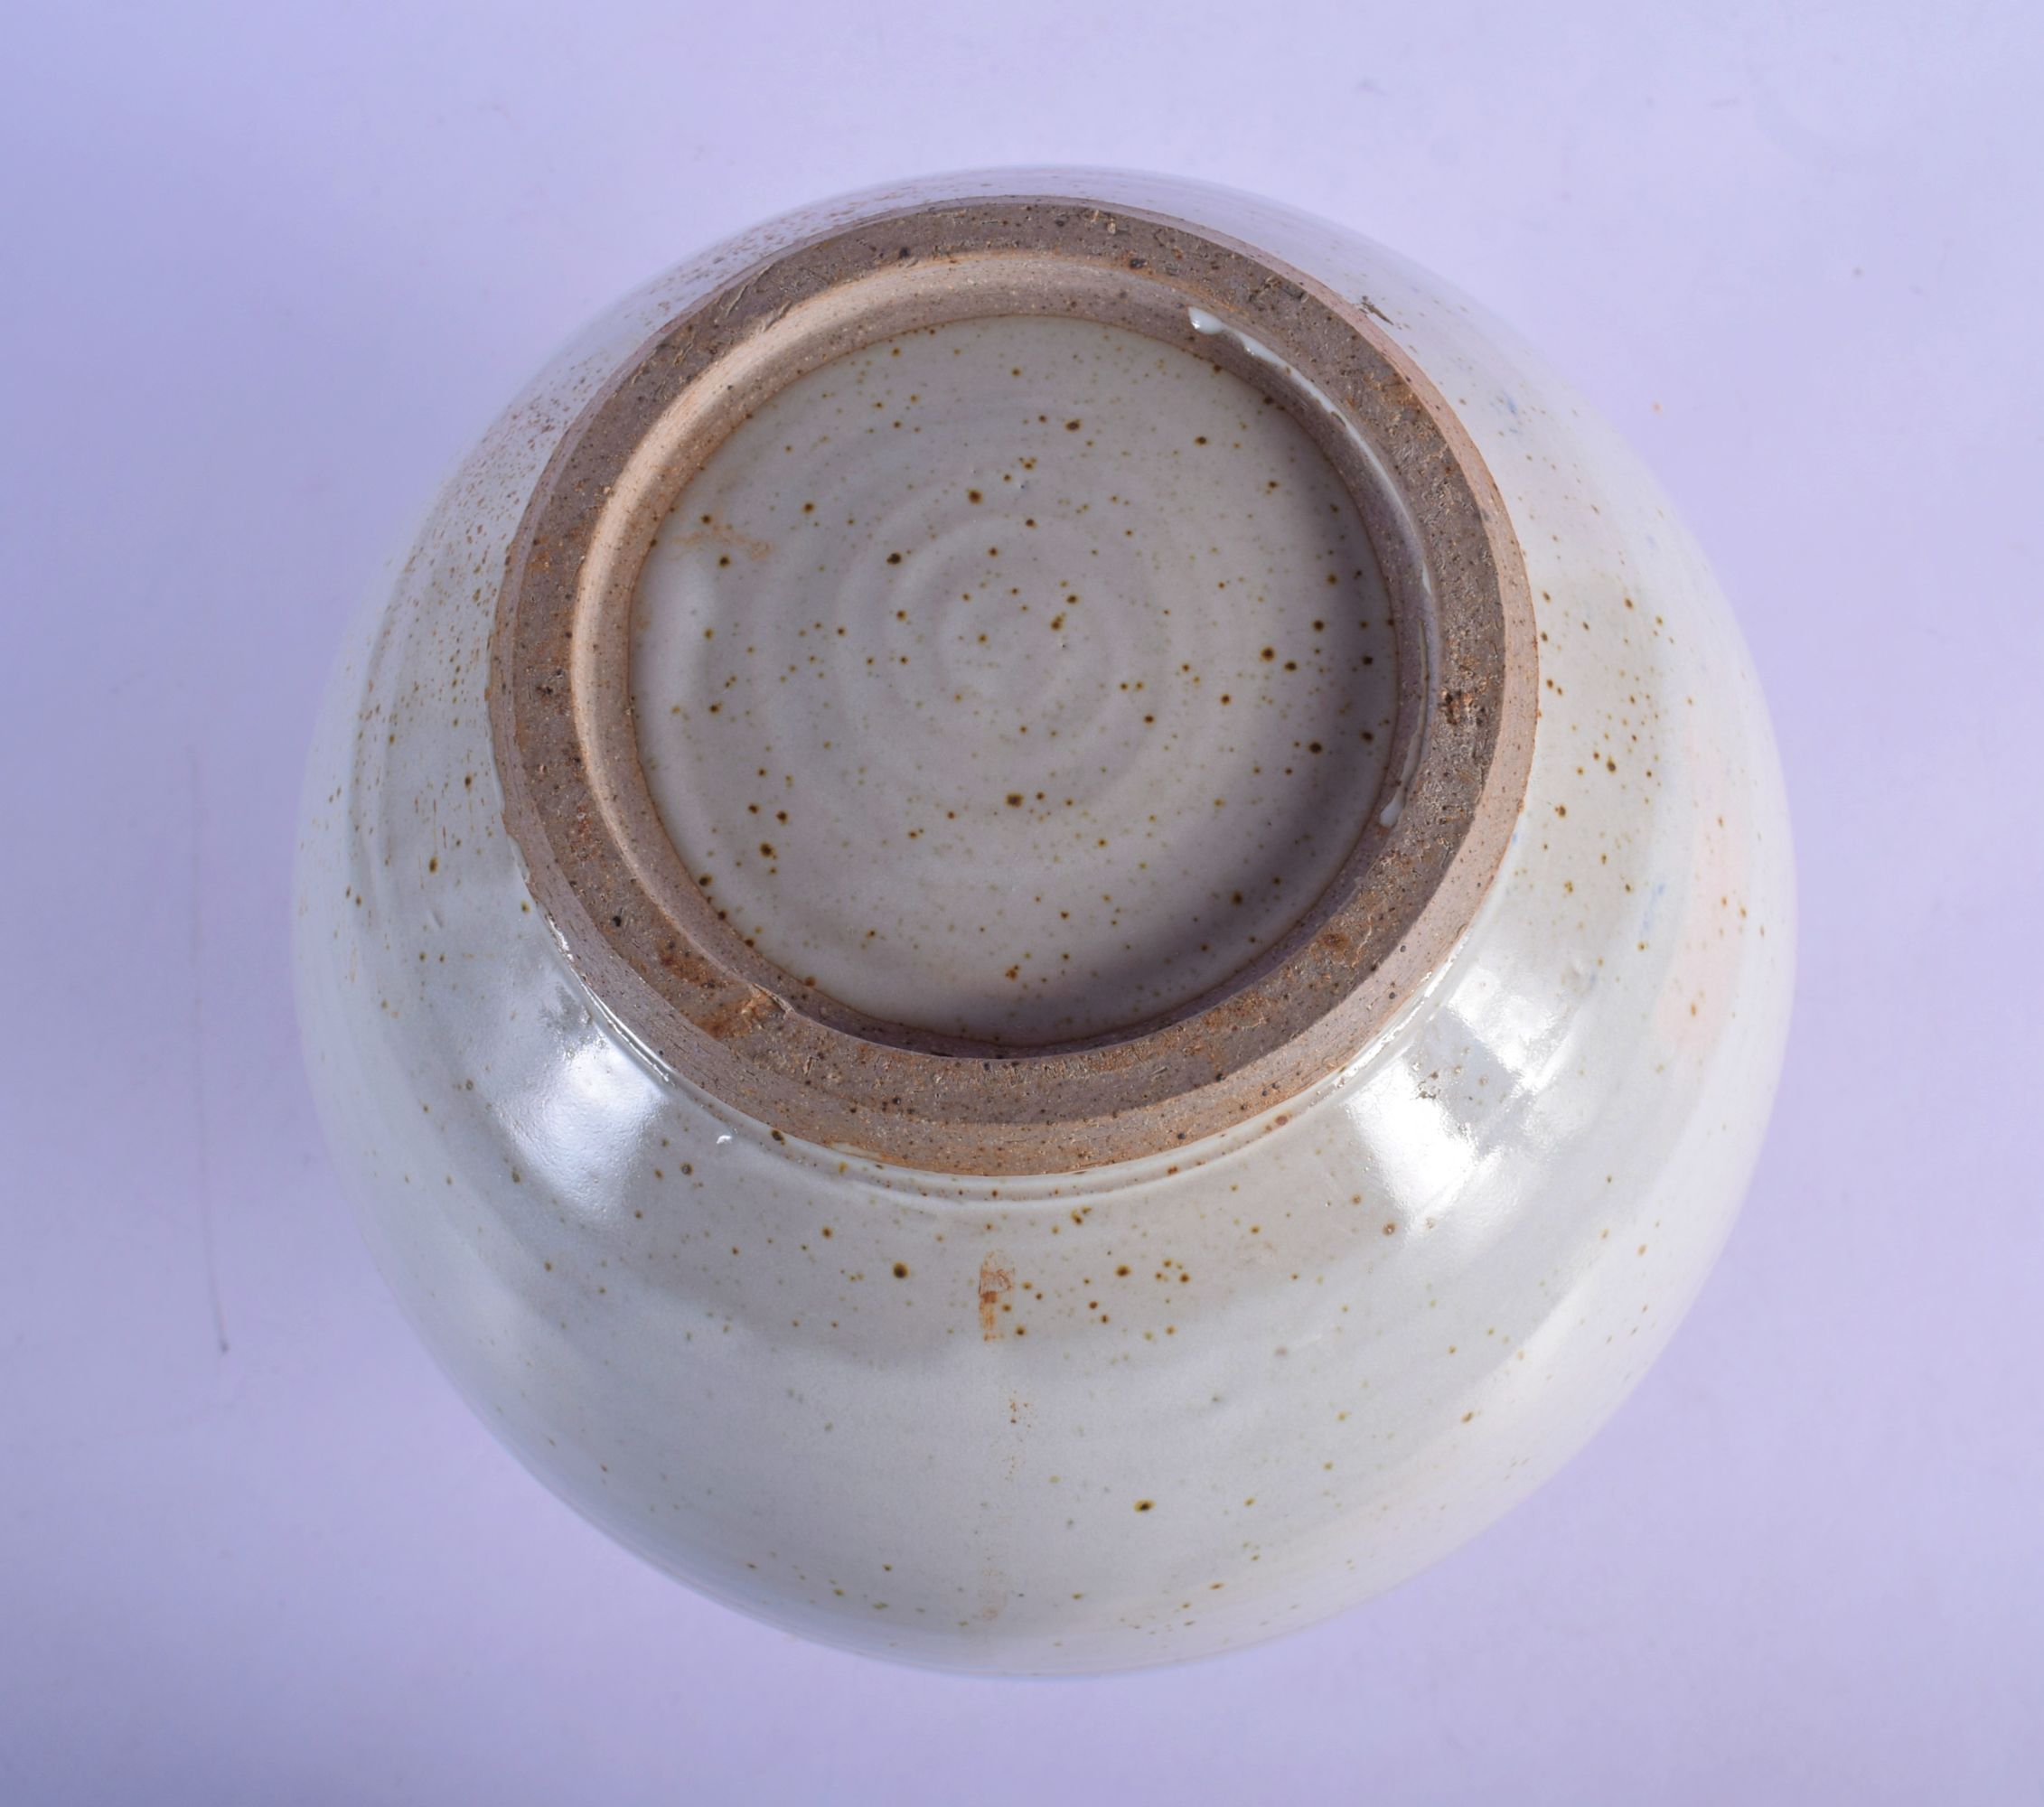 A LARGE STUDIO POTTERY STONEWARE VASE painted with sprays. 26 cm x 18 cm. - Image 5 of 5